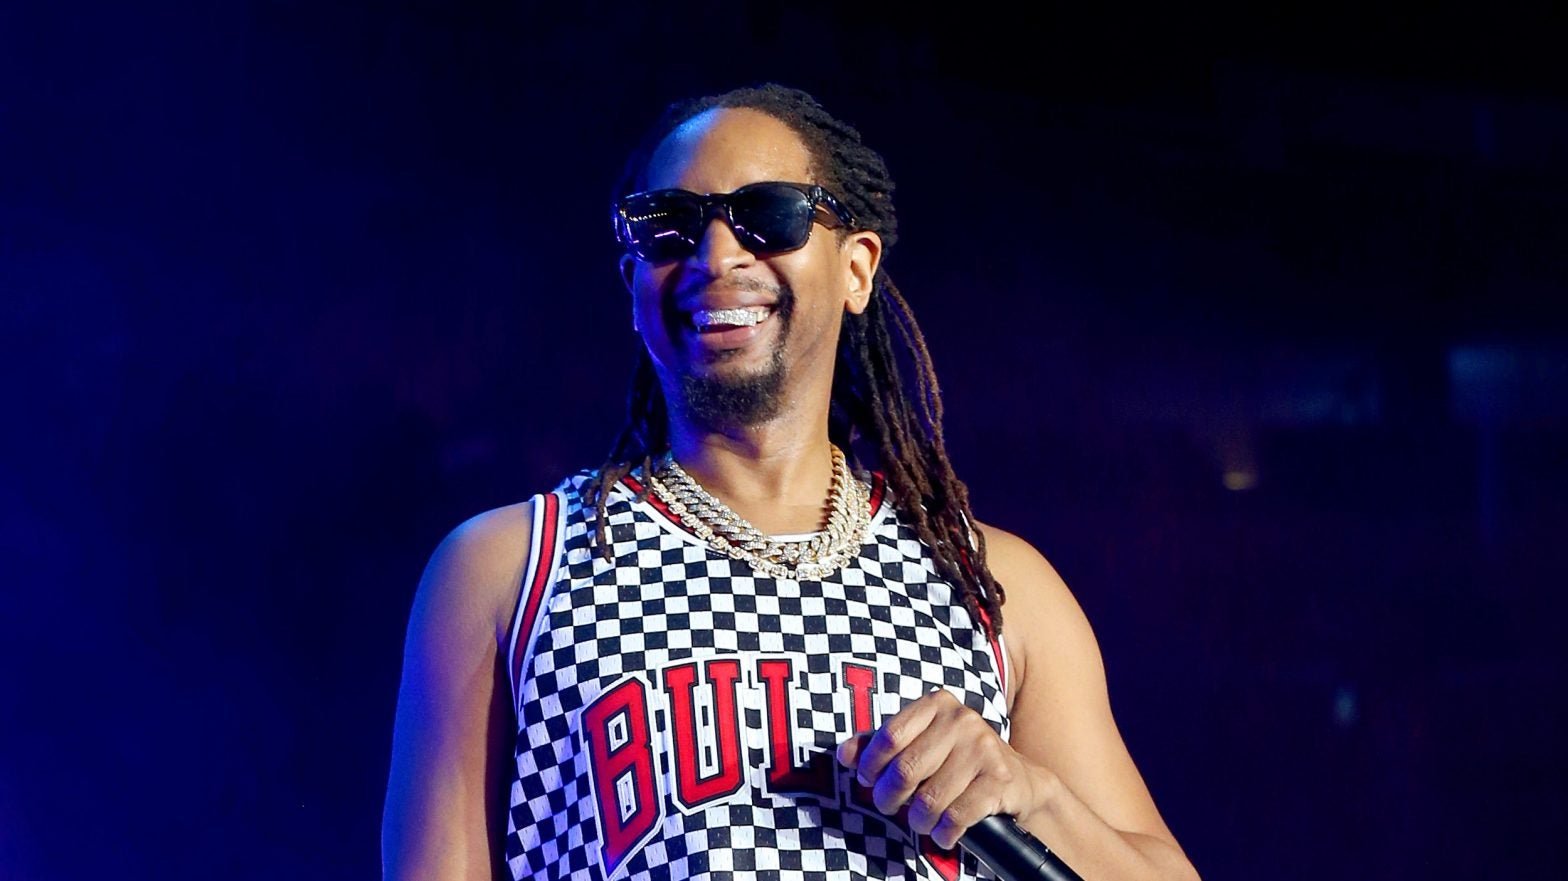 Lil Jon Drags Congressional Republican For Using 'Get Low' Lyrics To Promote His Win